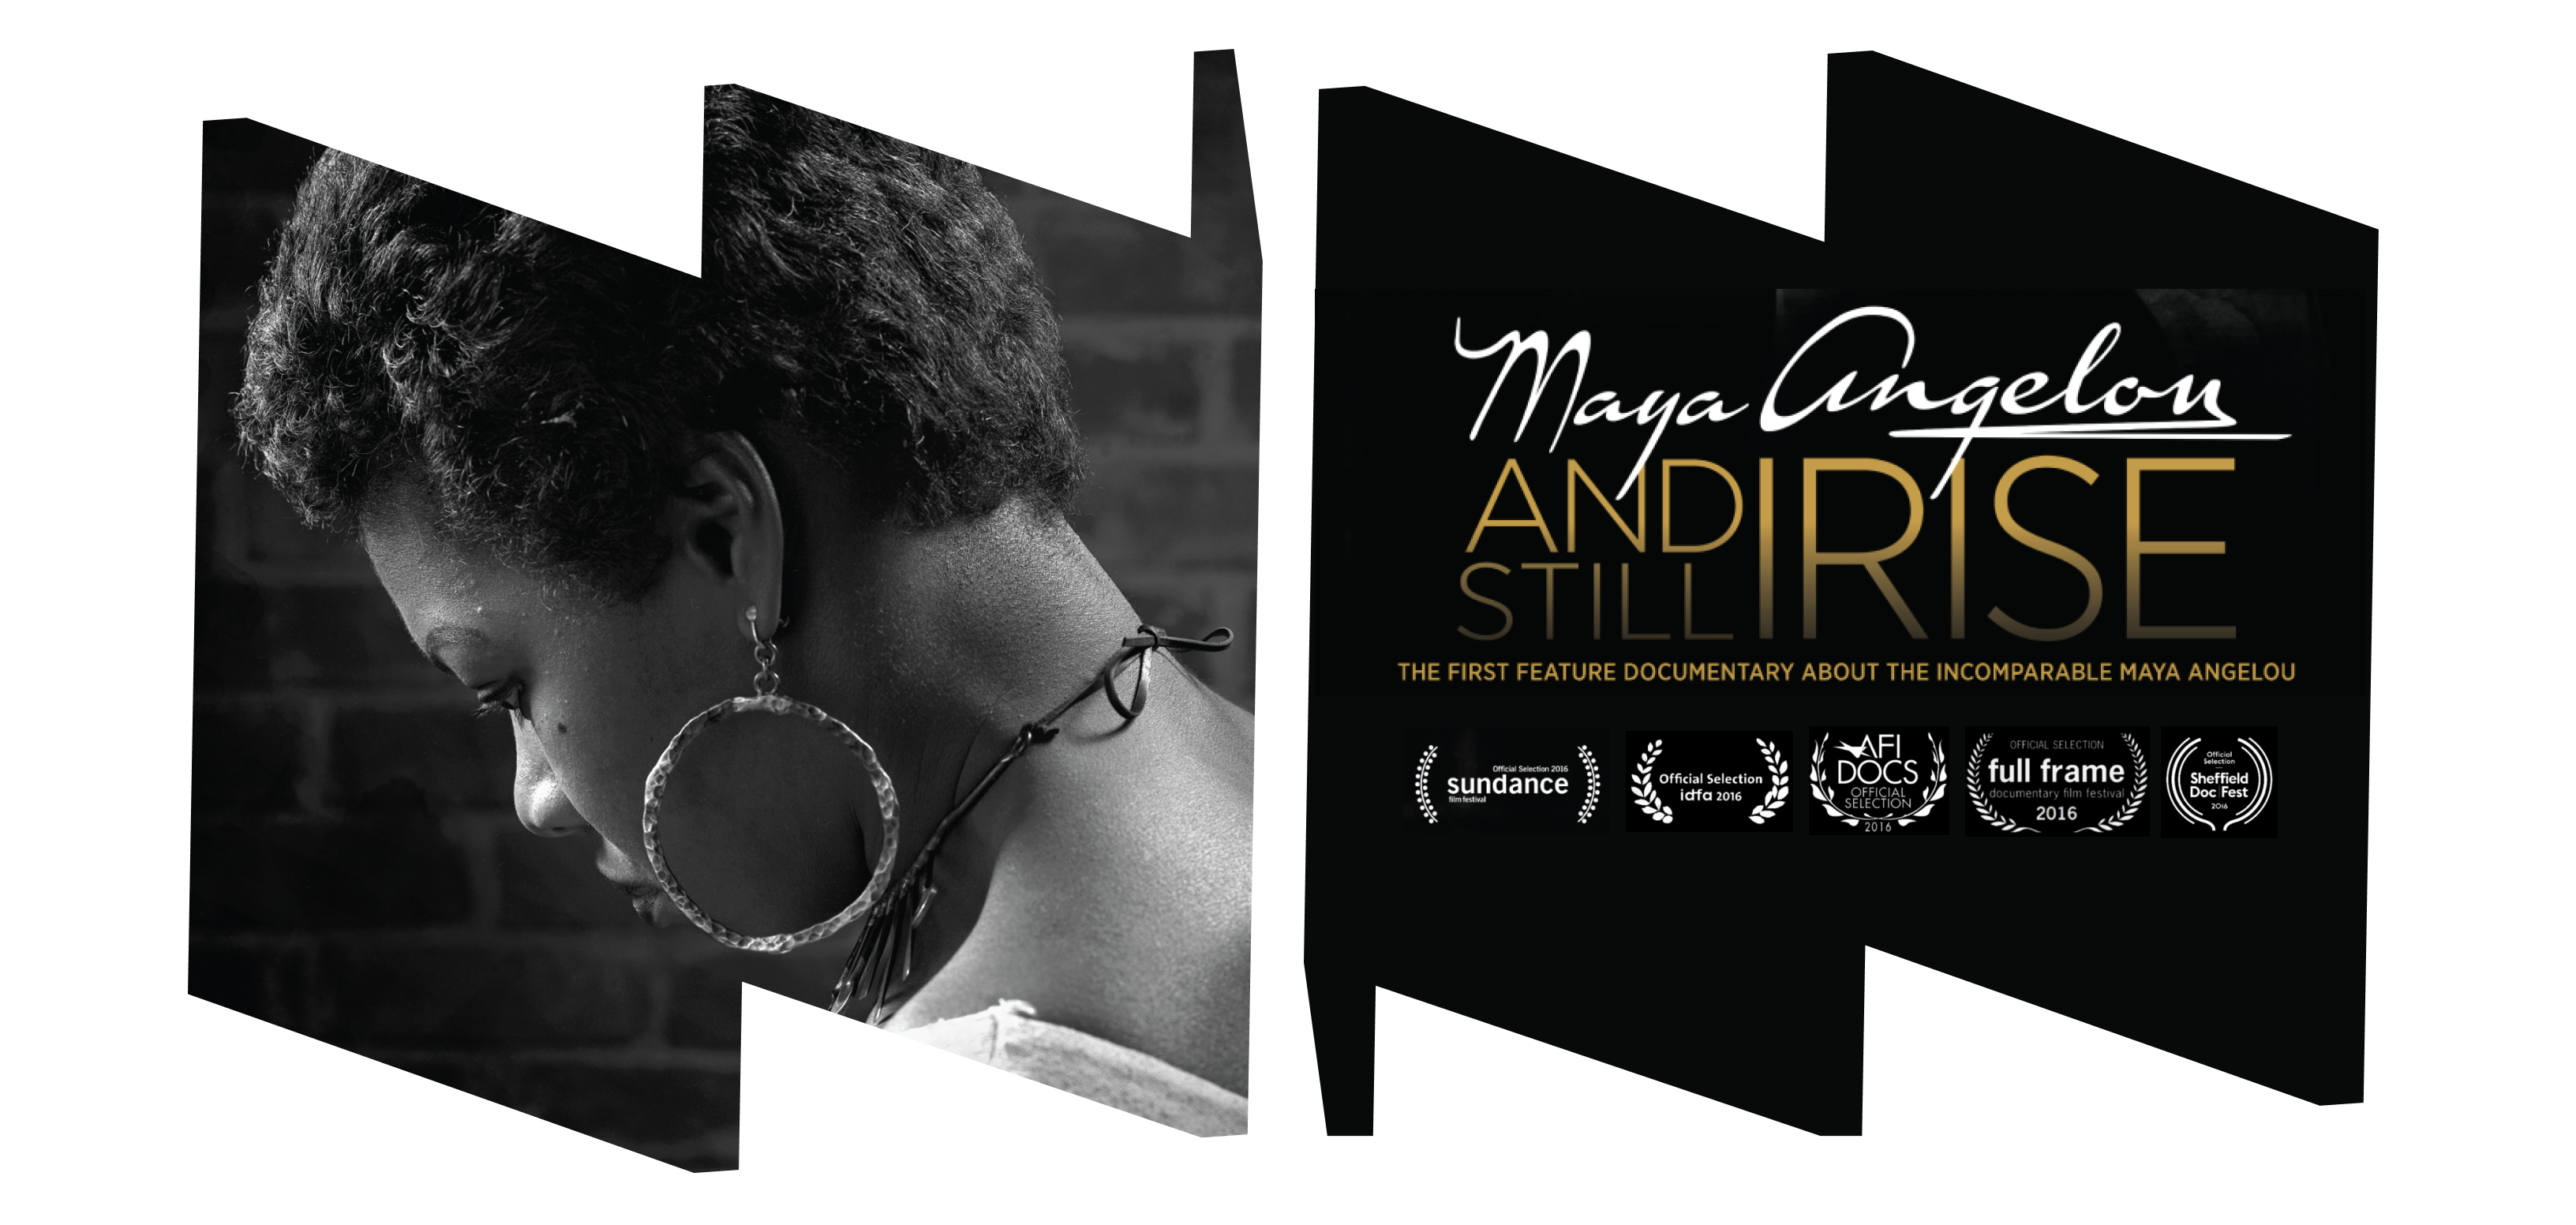 Image of Maya Angelou and the film poster for the documentary Maya Angelou: And Still I Rise